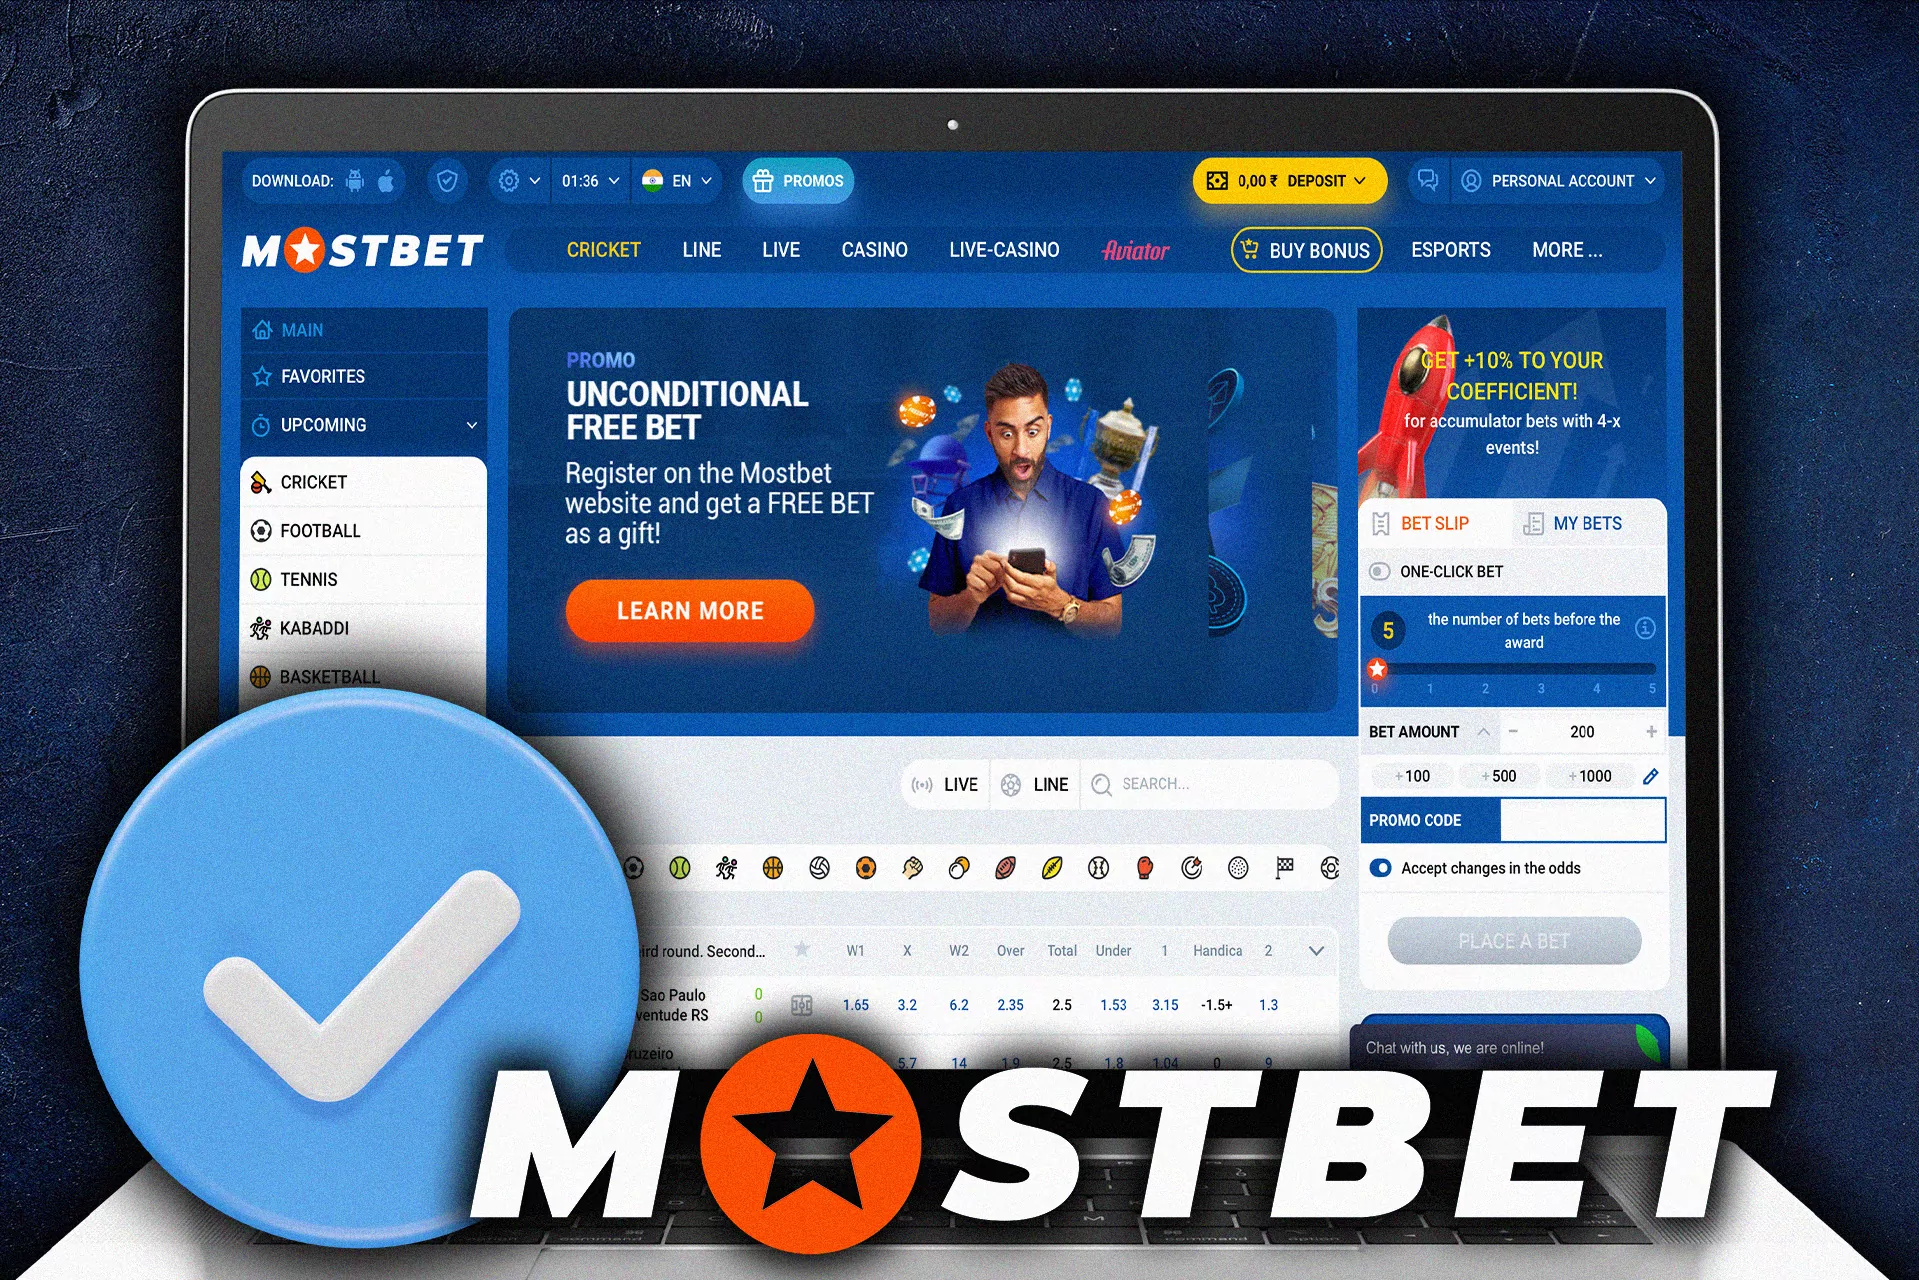 Mostbet bookmaker office operates legally in India under international license № 8048/JAZ2016-065.